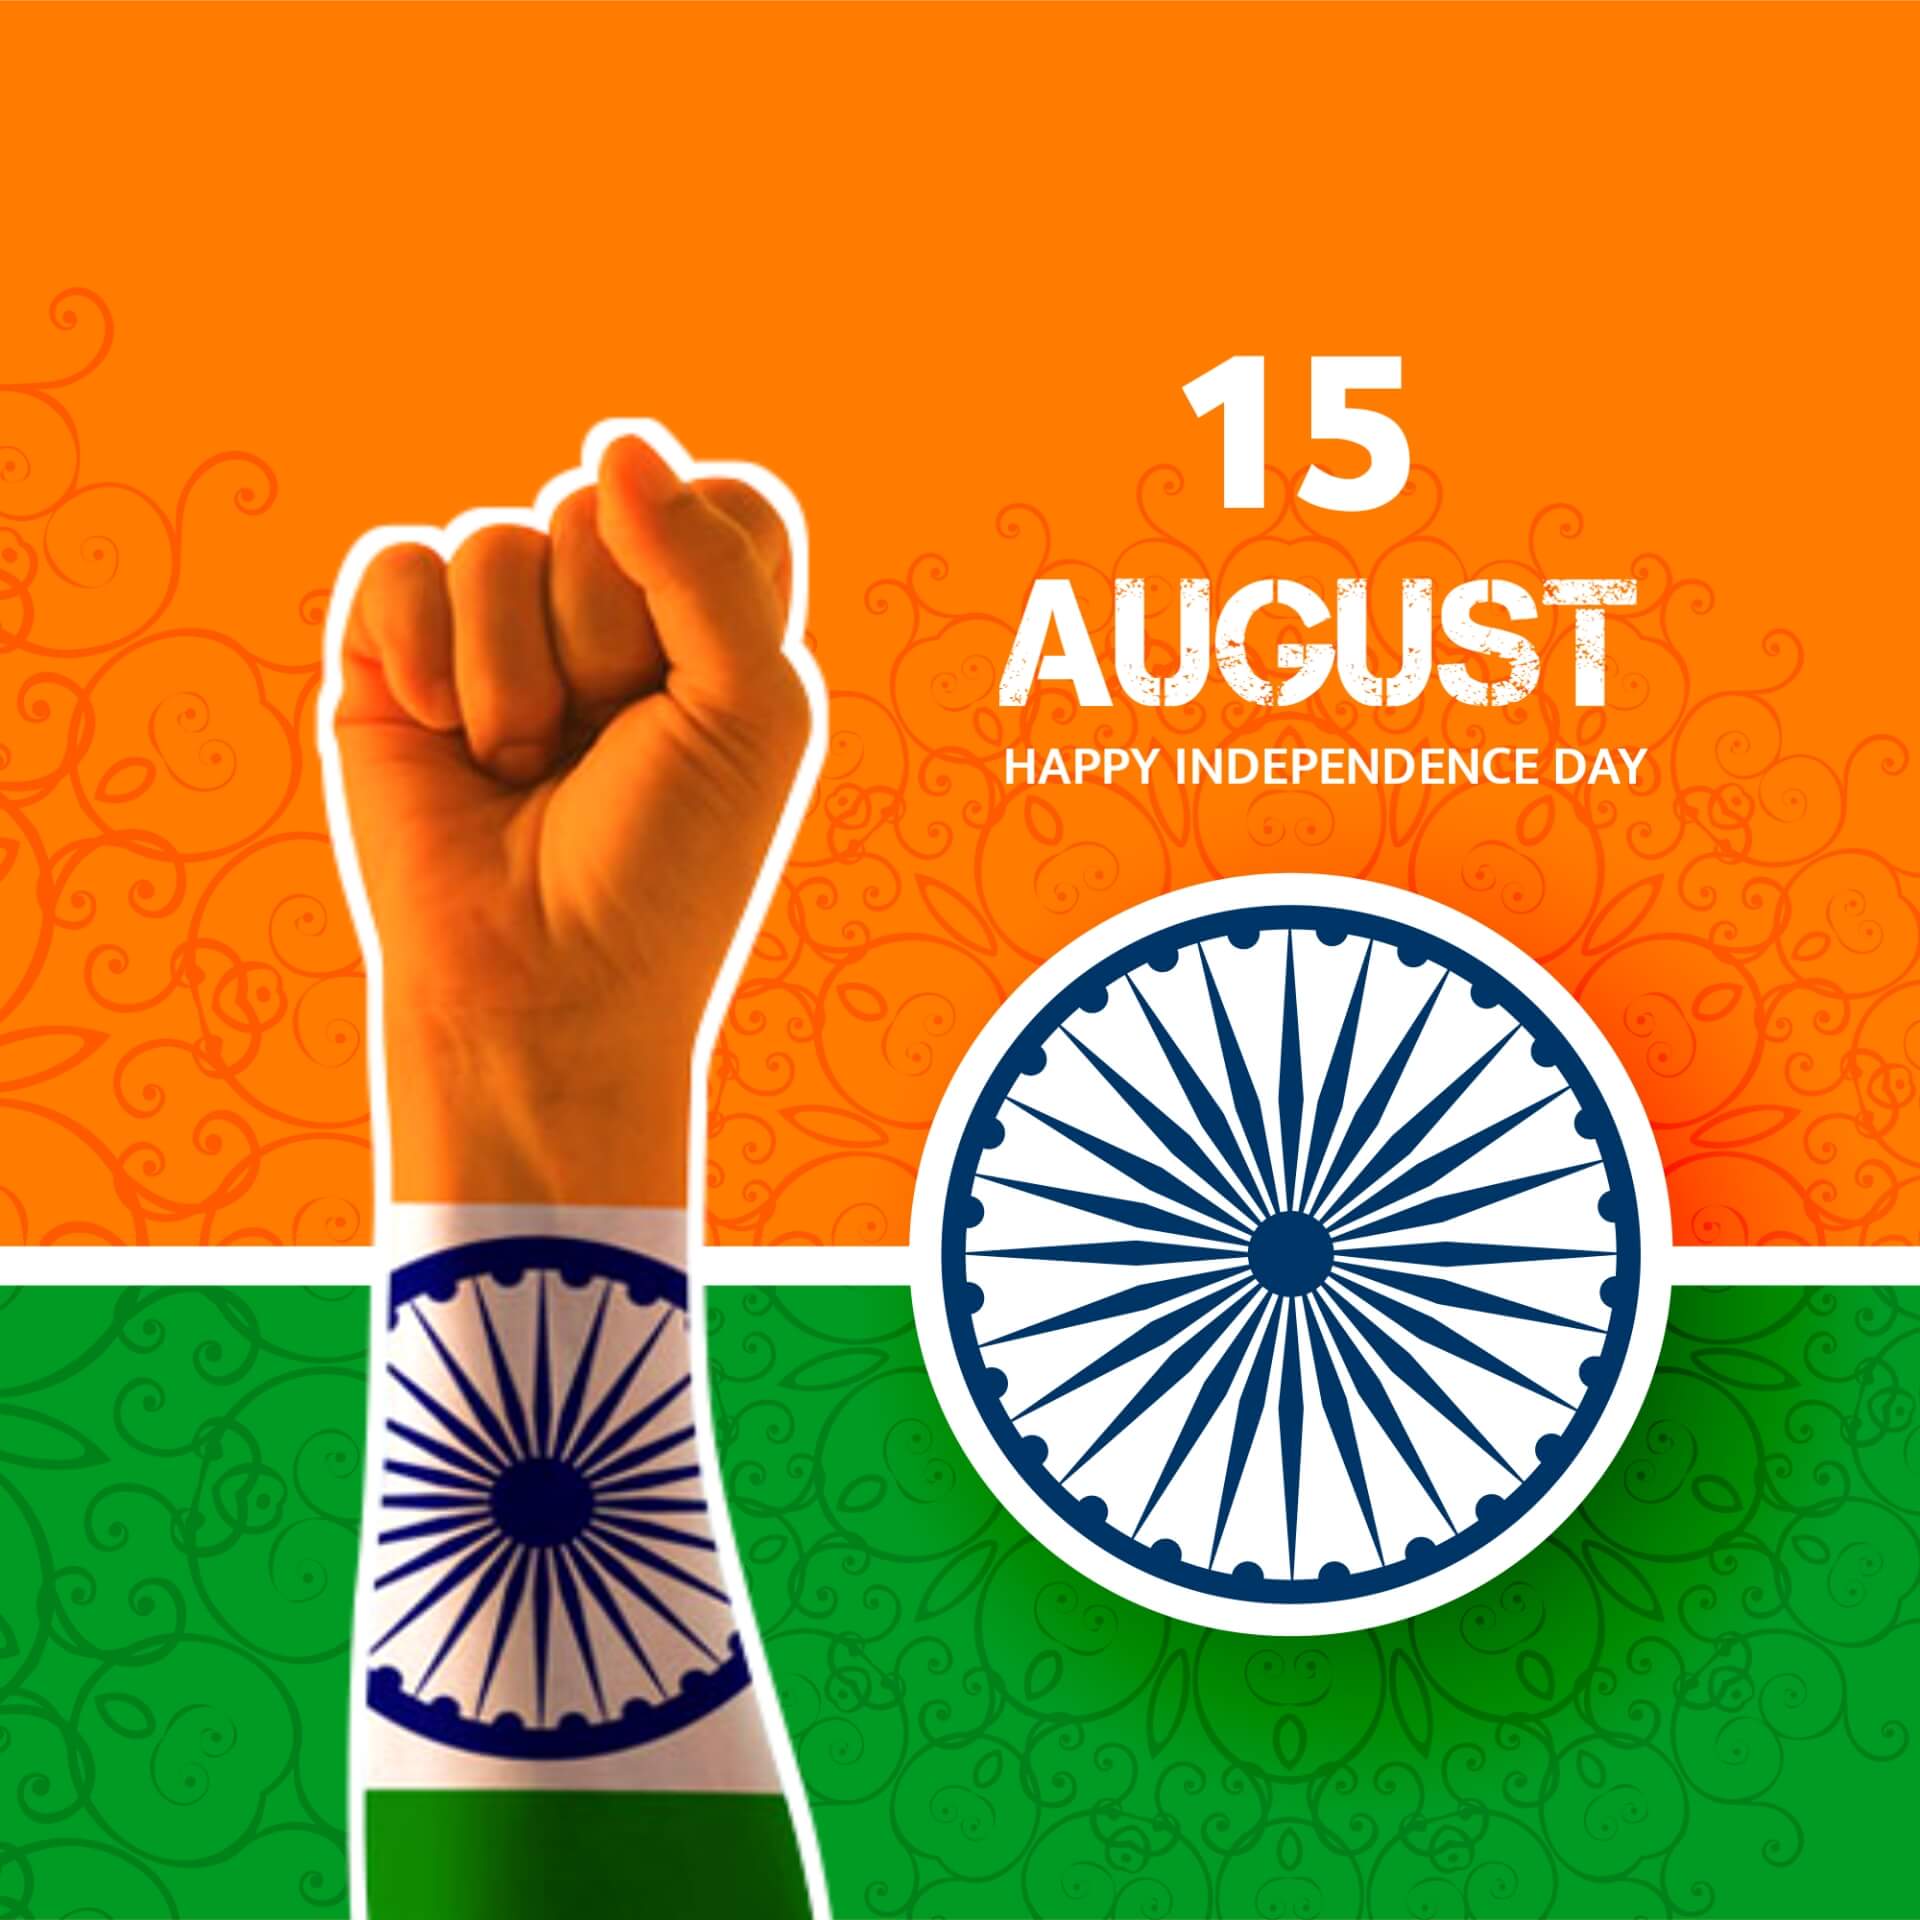 BEST India Independence Day Image, Photo & Picture 2021